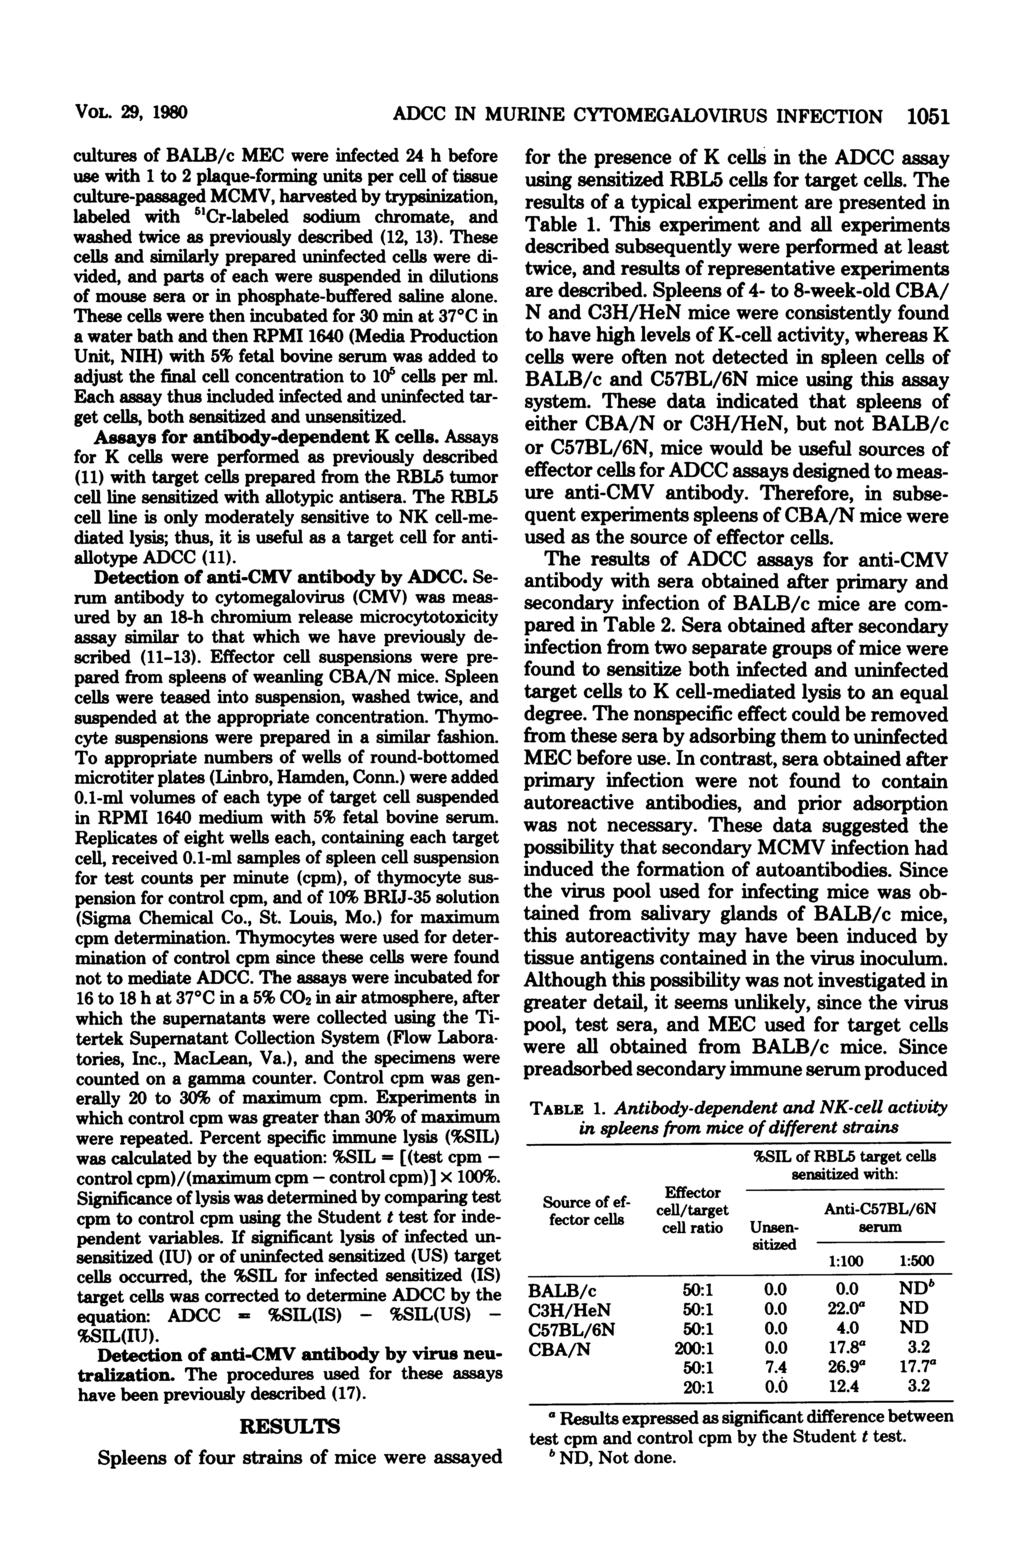 VOL. 29, 1980 cultures of BALB/c MEC were infected 24 h before use with 1 to 2 plaque-forming units per cell of tissue culture-passaged MCMV, harvested by trypsinization, labeled with 5"Cr-labeled